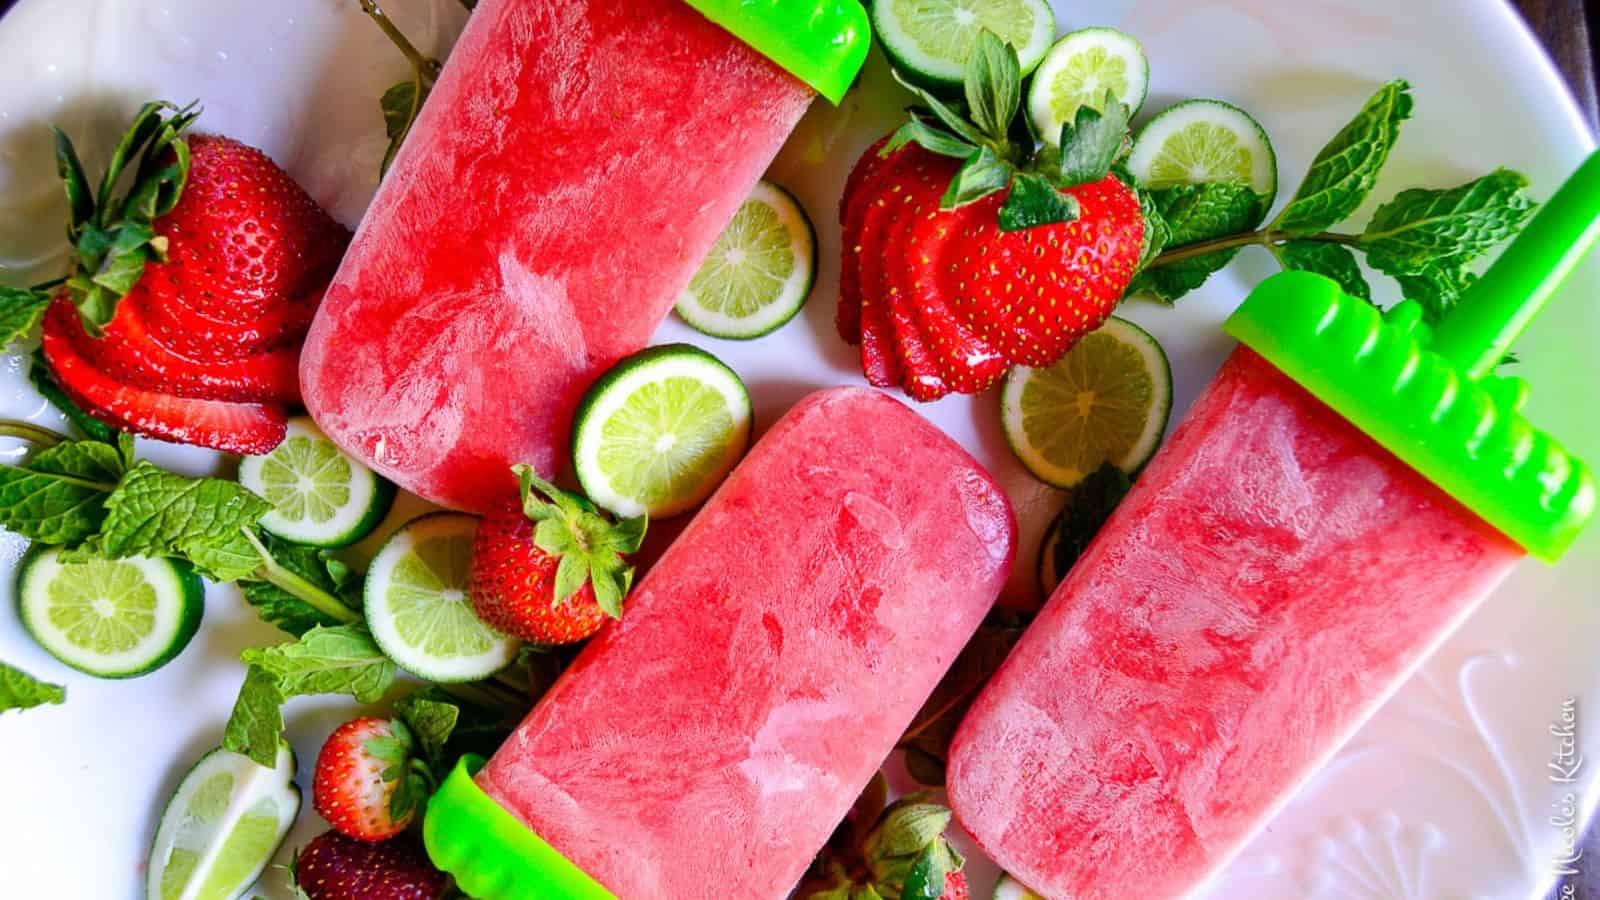 Strawberry mojito wine popsicles on a white plate with strawberries lime and mint leaves.